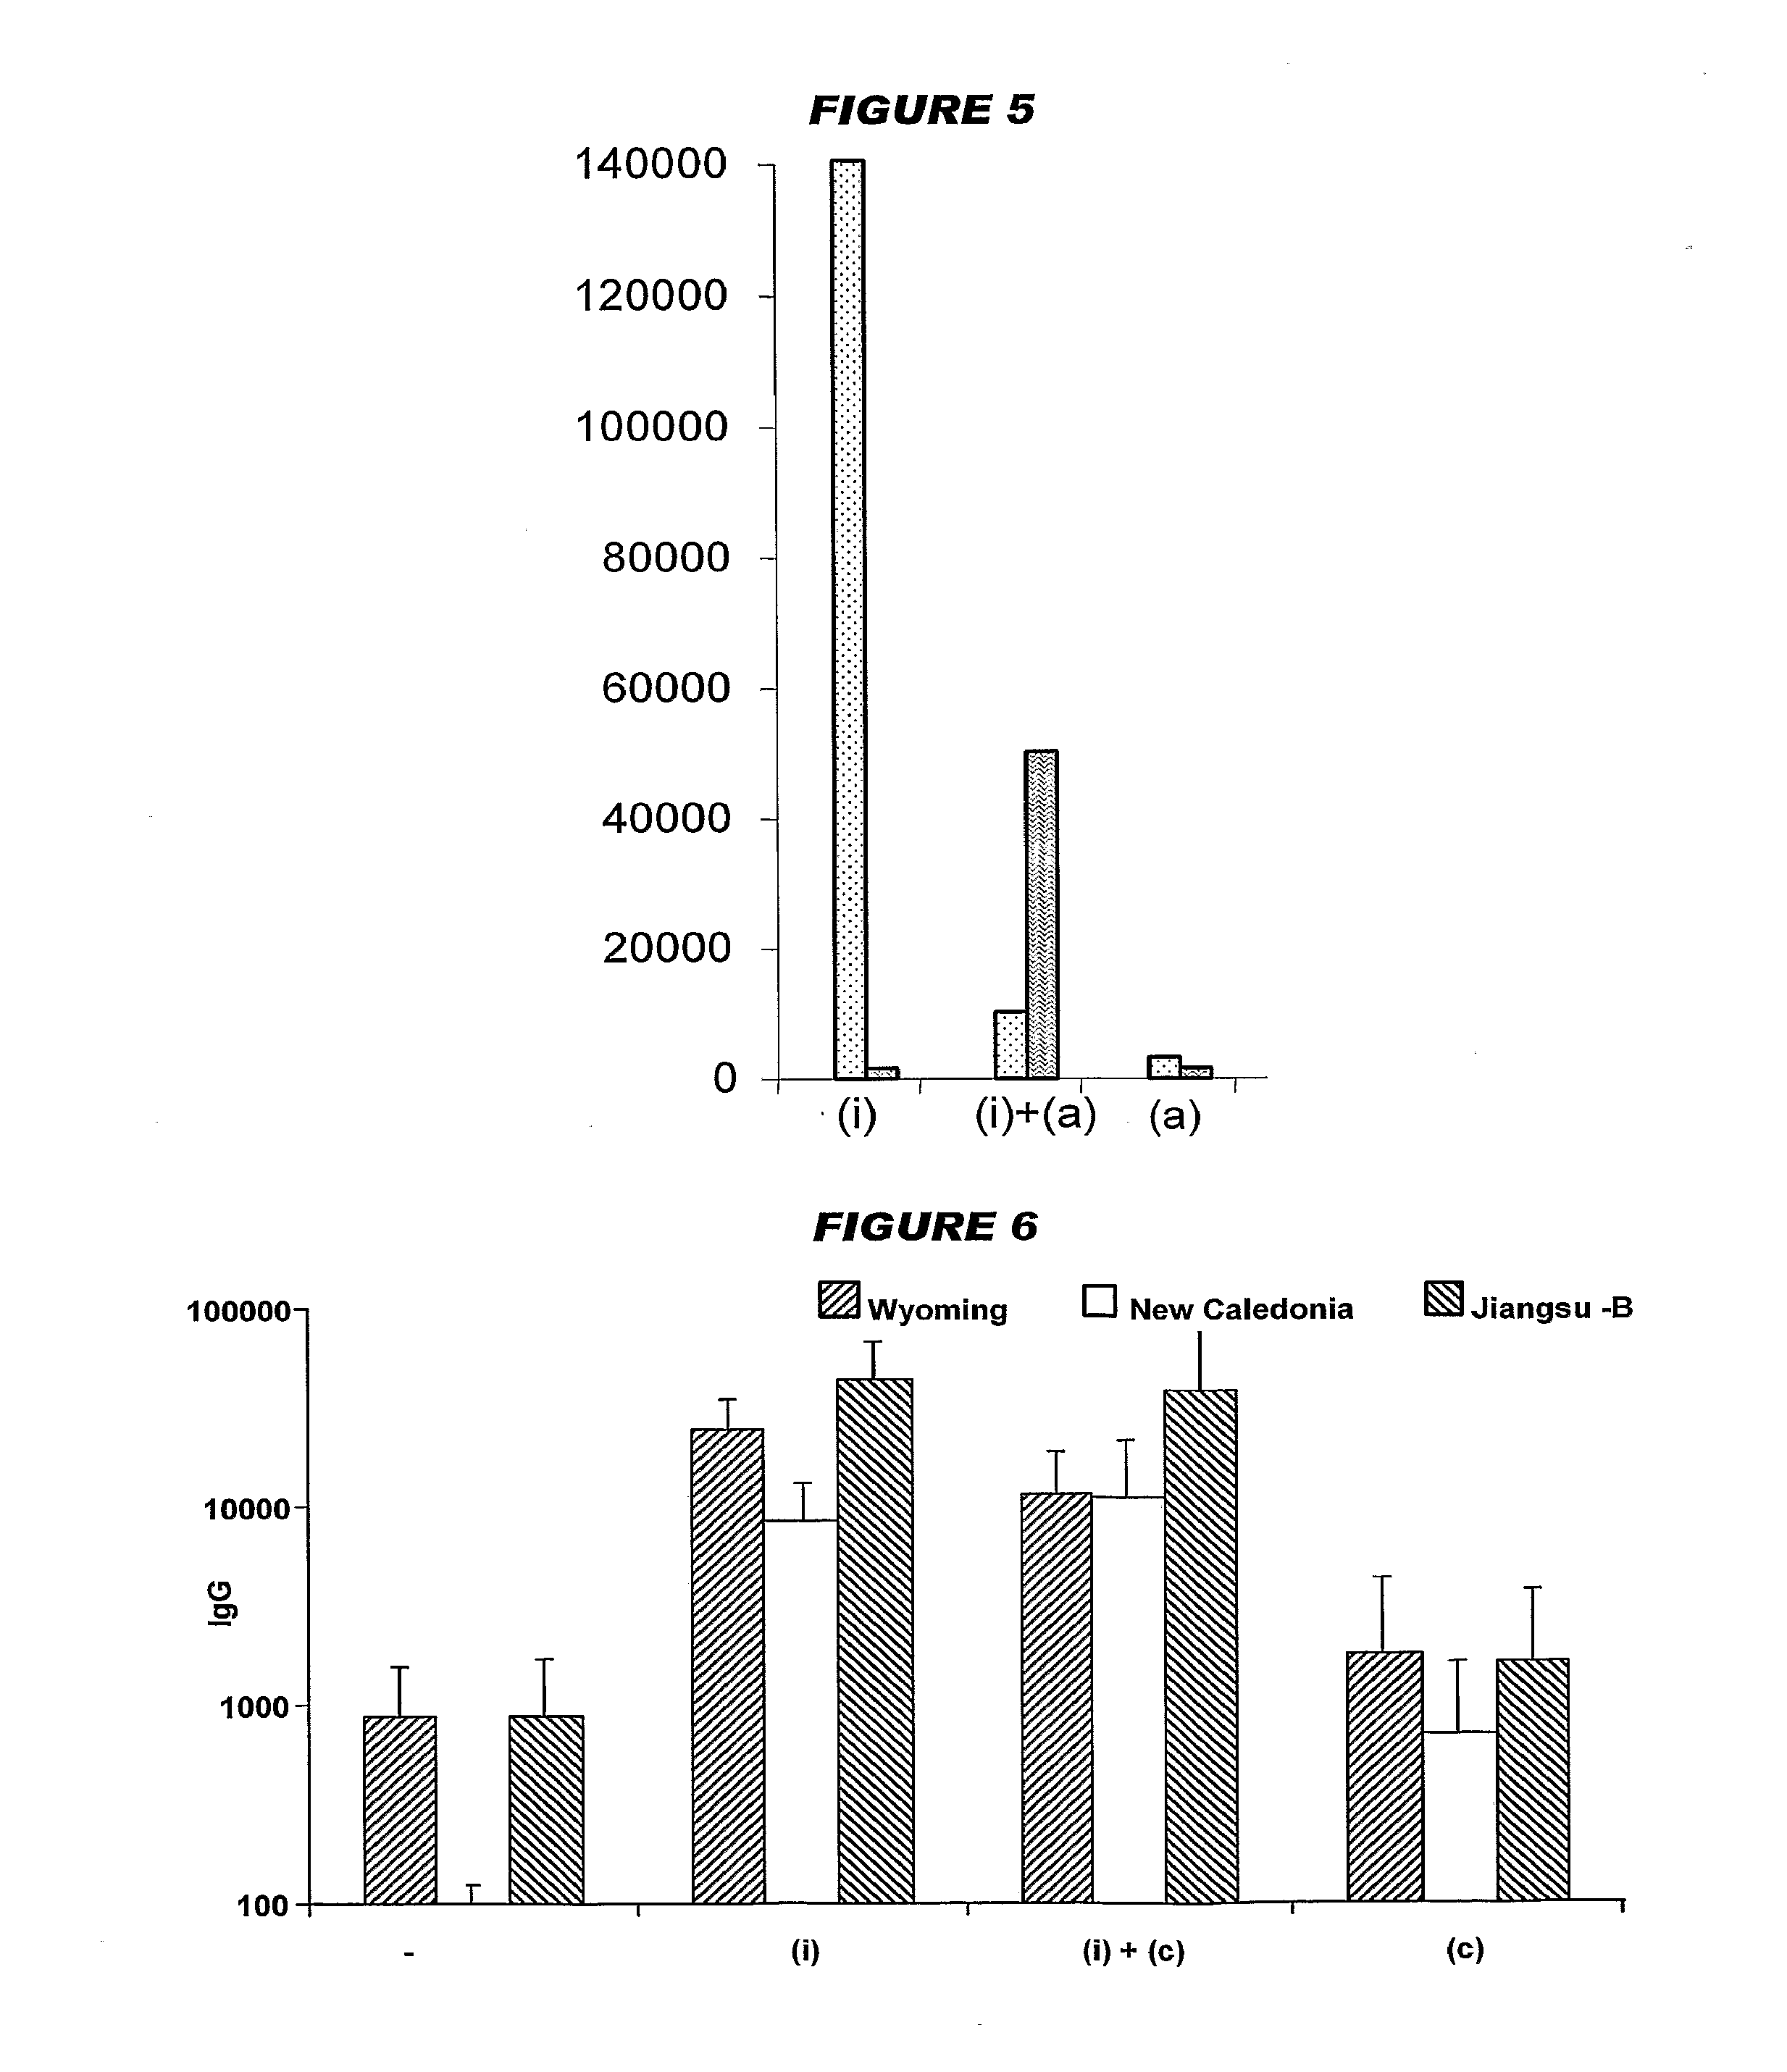 Adjuvanted influenza vaccines including cytokine-inducing agents